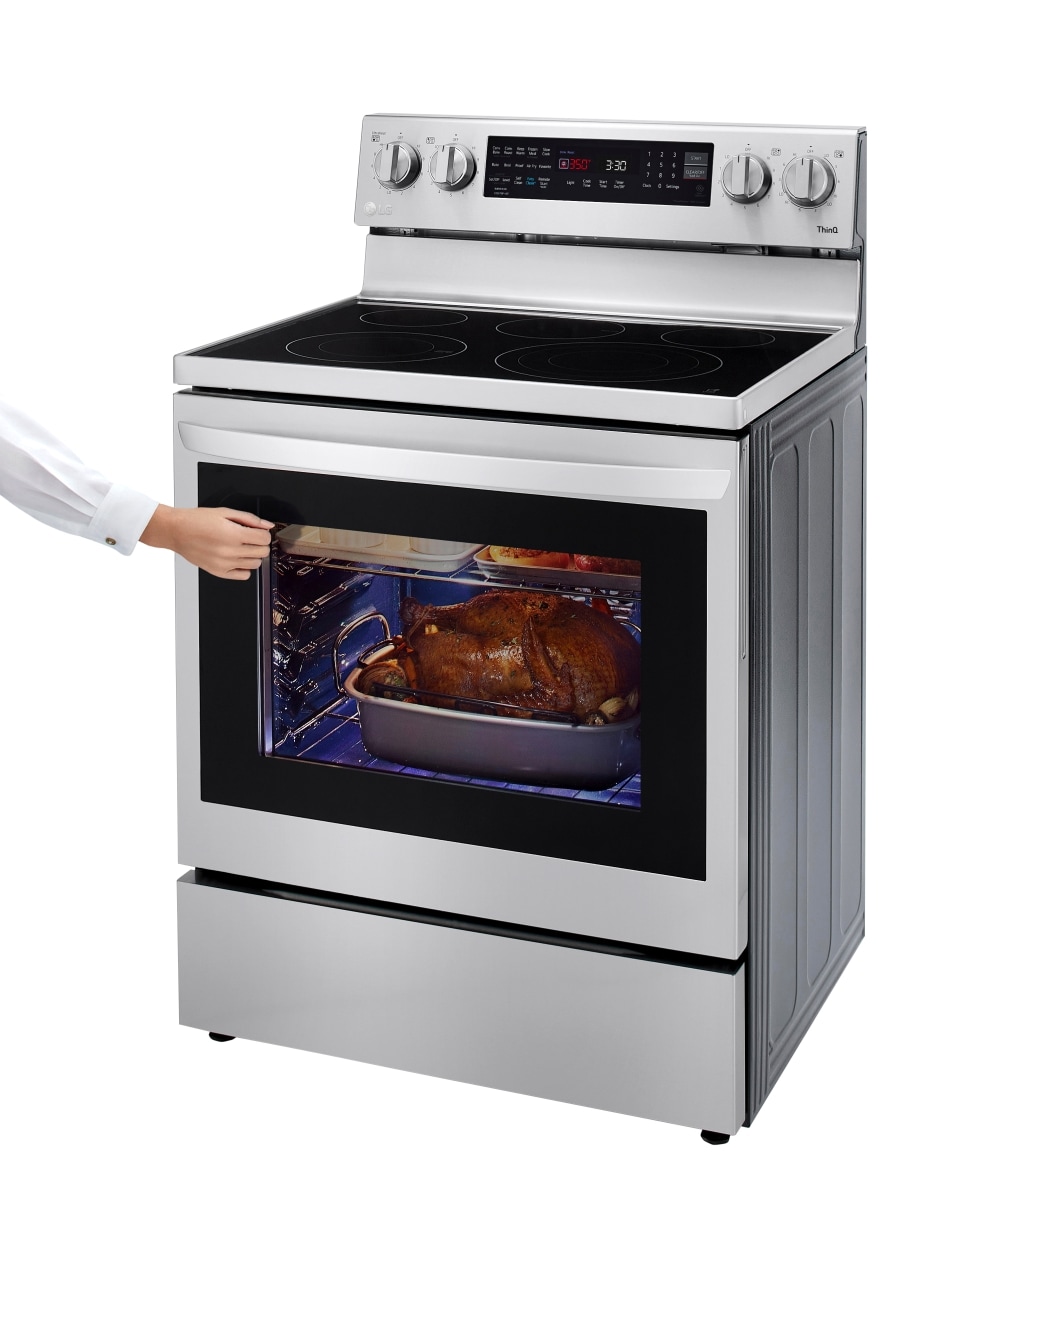 LG LREL6325F: InstaView Electric Range with Air Fryer | LG USA